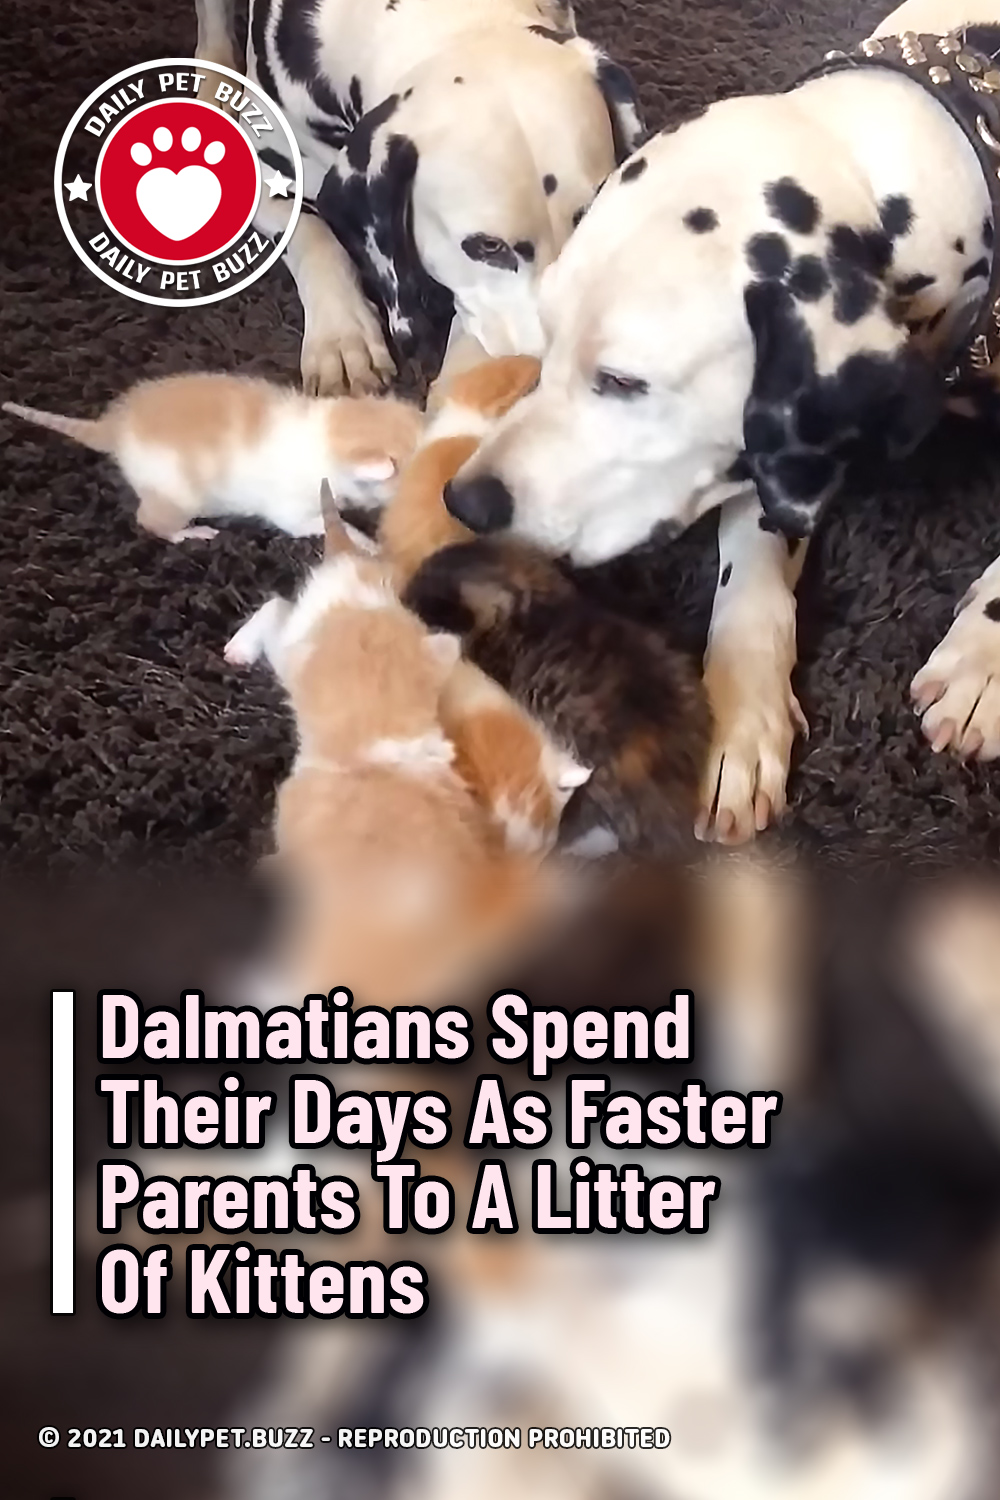 Dalmatians Spend Their Days As Faster Parents To A Litter Of Kittens